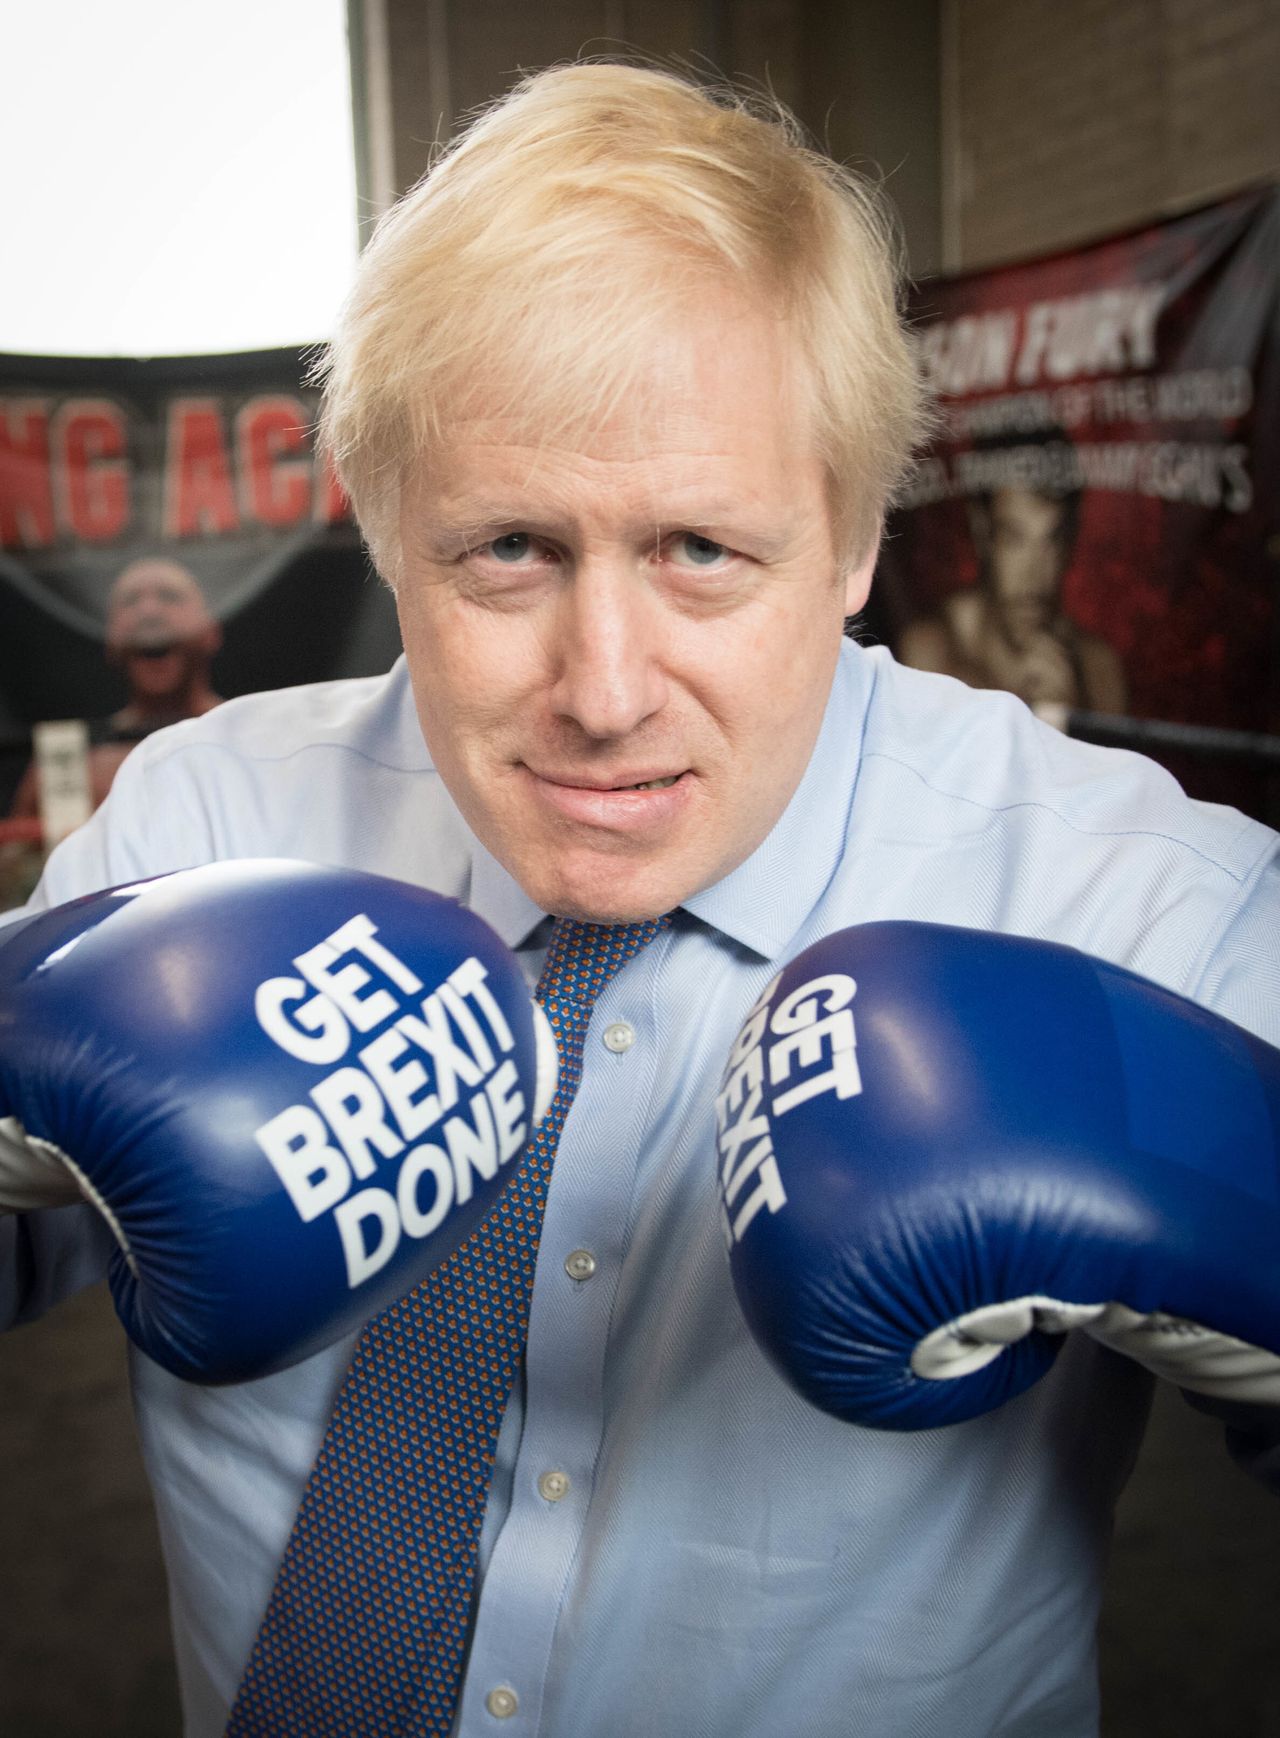 Prime Minister Boris Johnson during a visit to Jimmy Egan's Boxing Academy at Wythenshawe, while on the campaign trail ahead of the December election